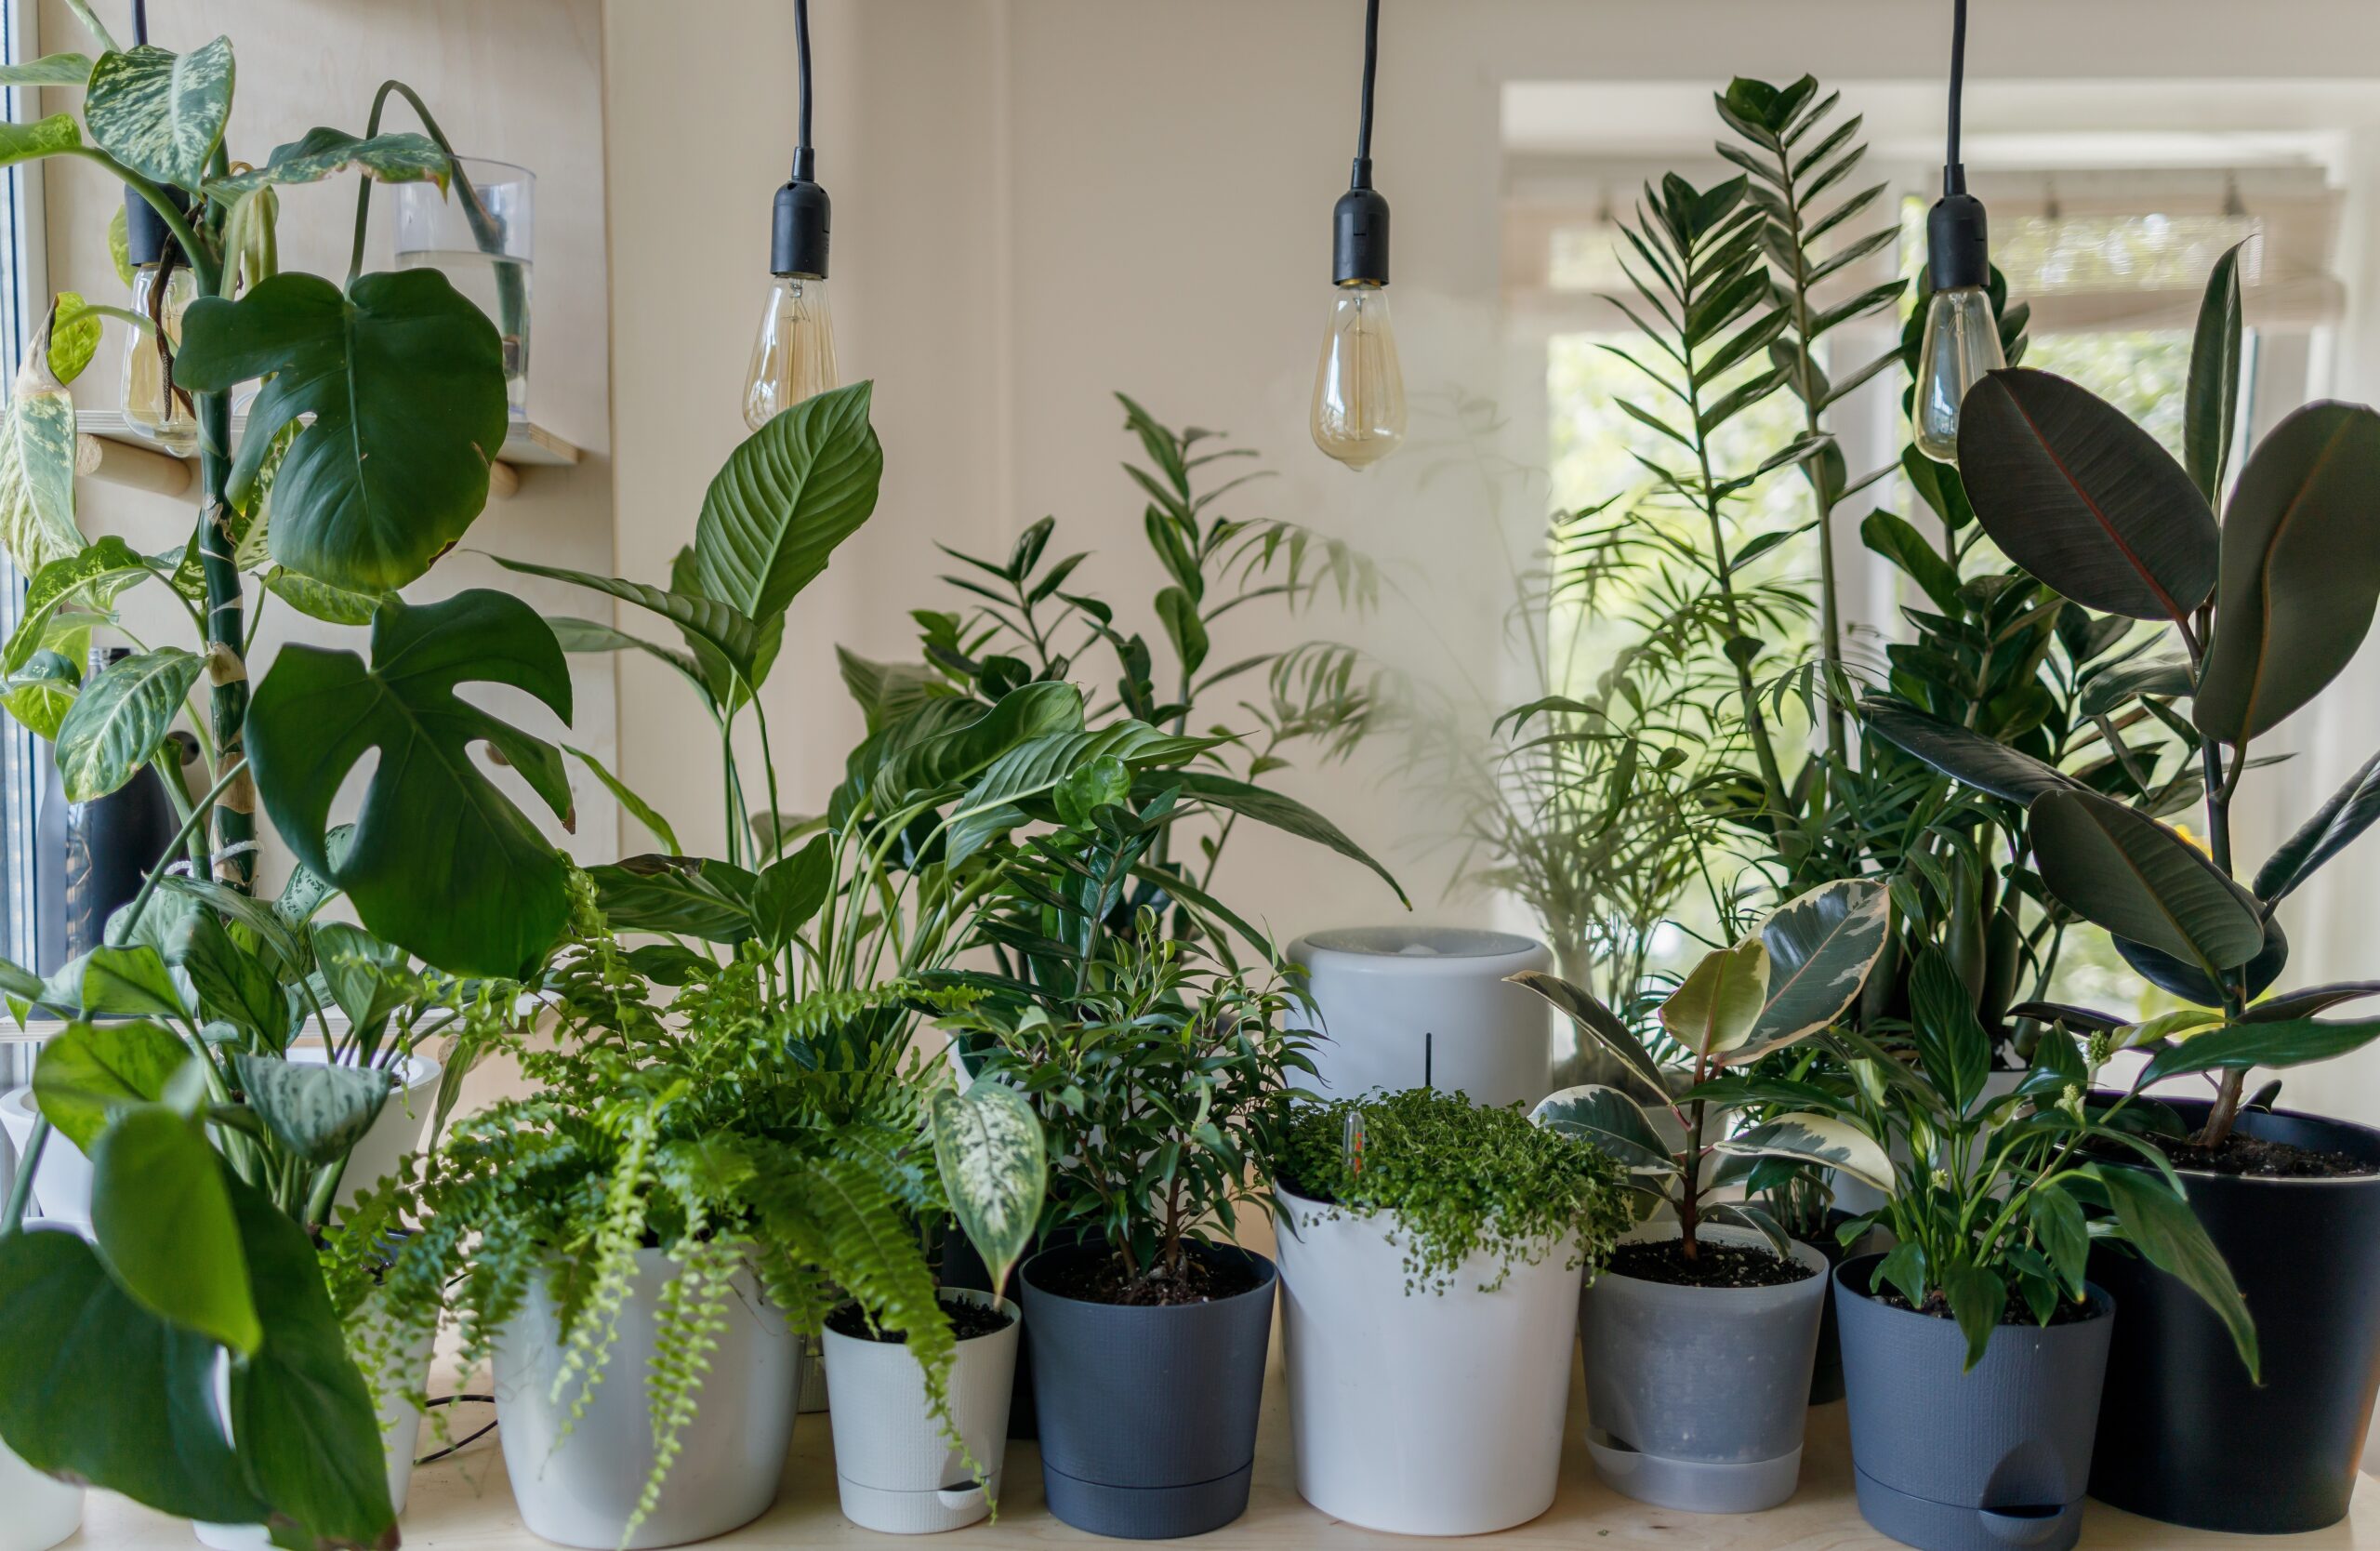 Top 7 Indoor Gardening Tips - What You Should Know!